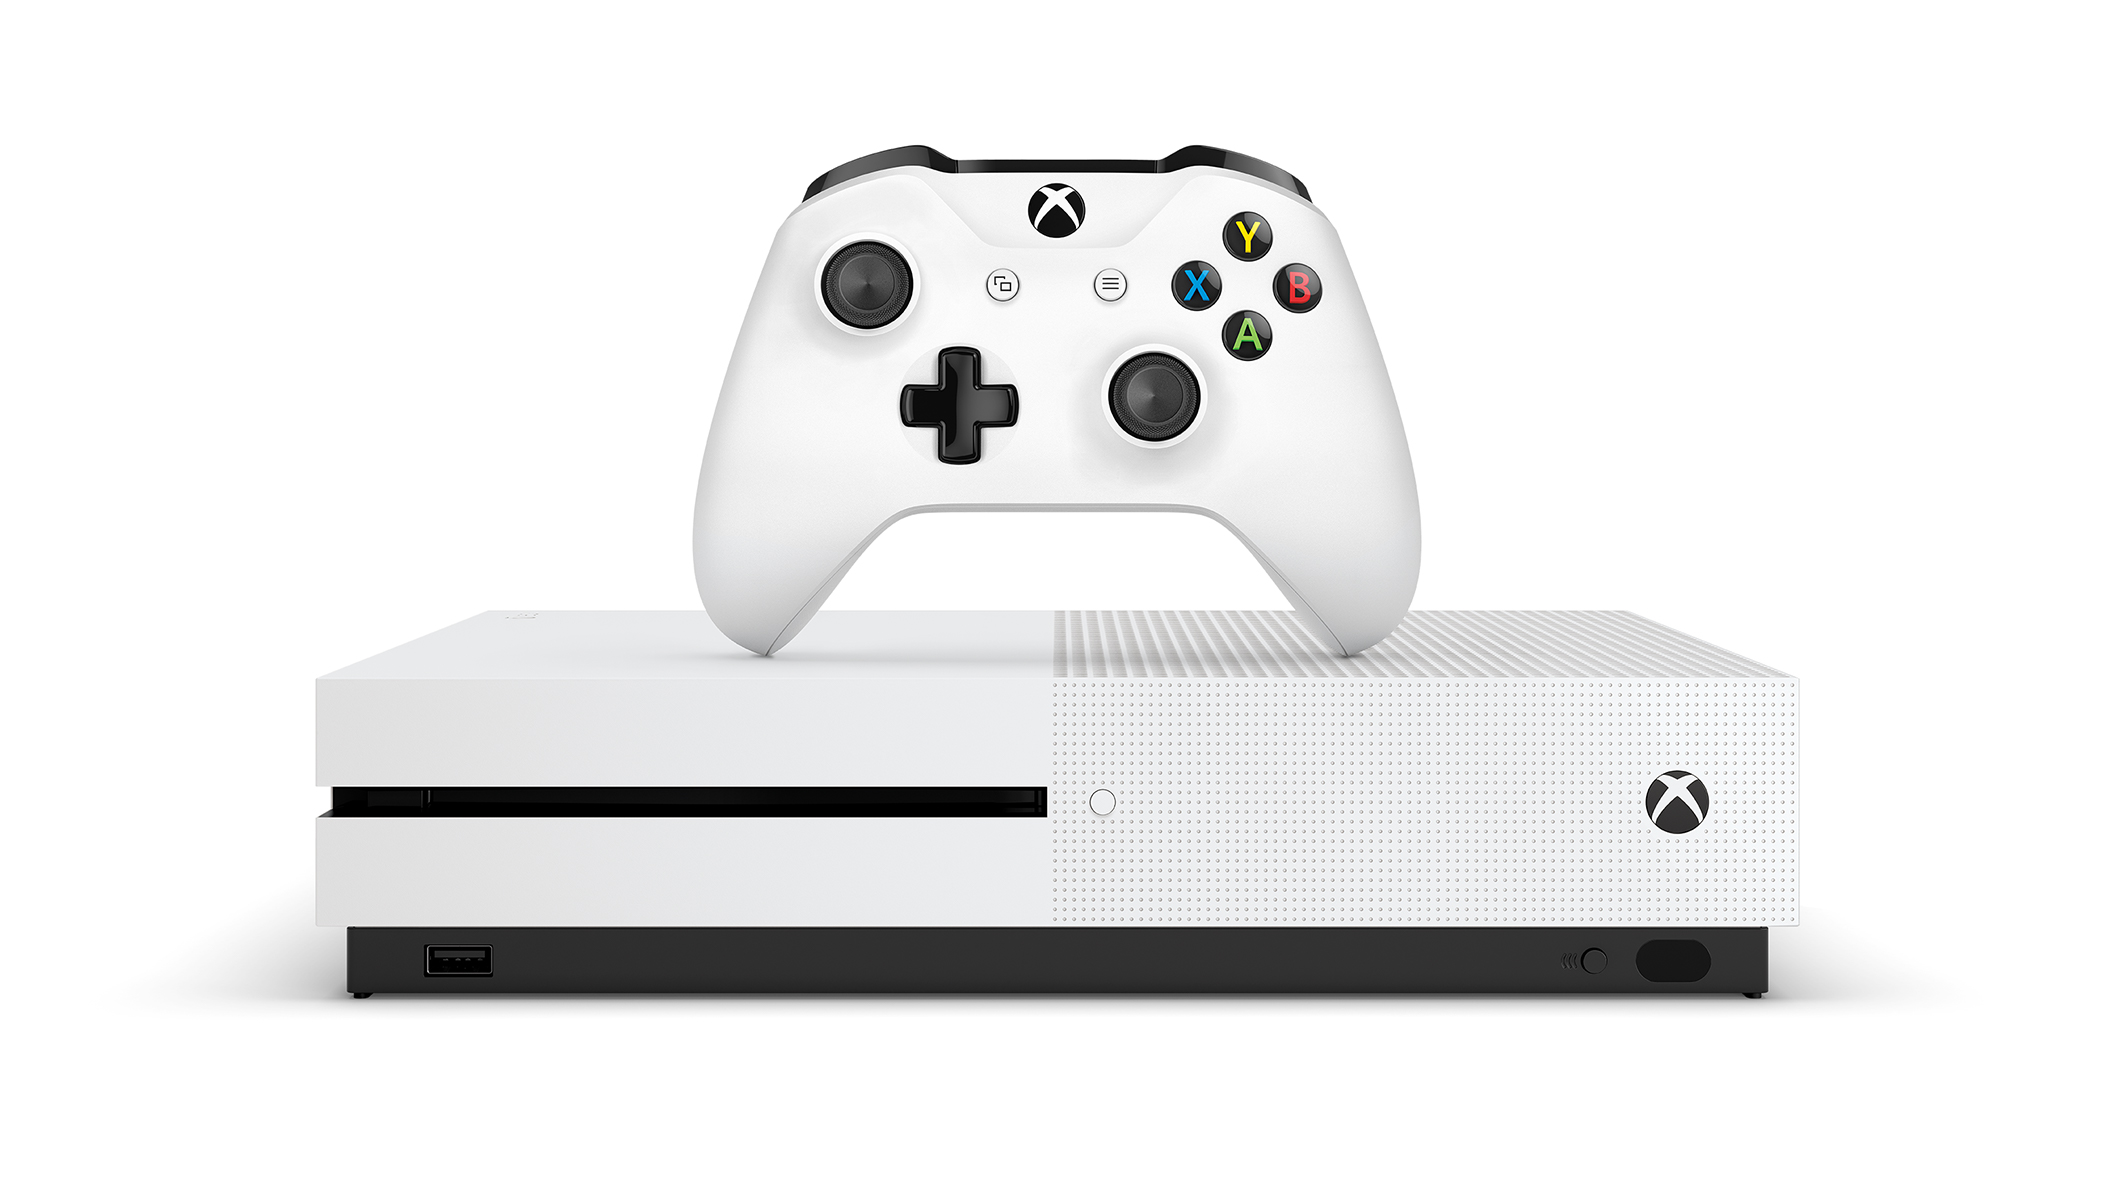 xbox one s shopping